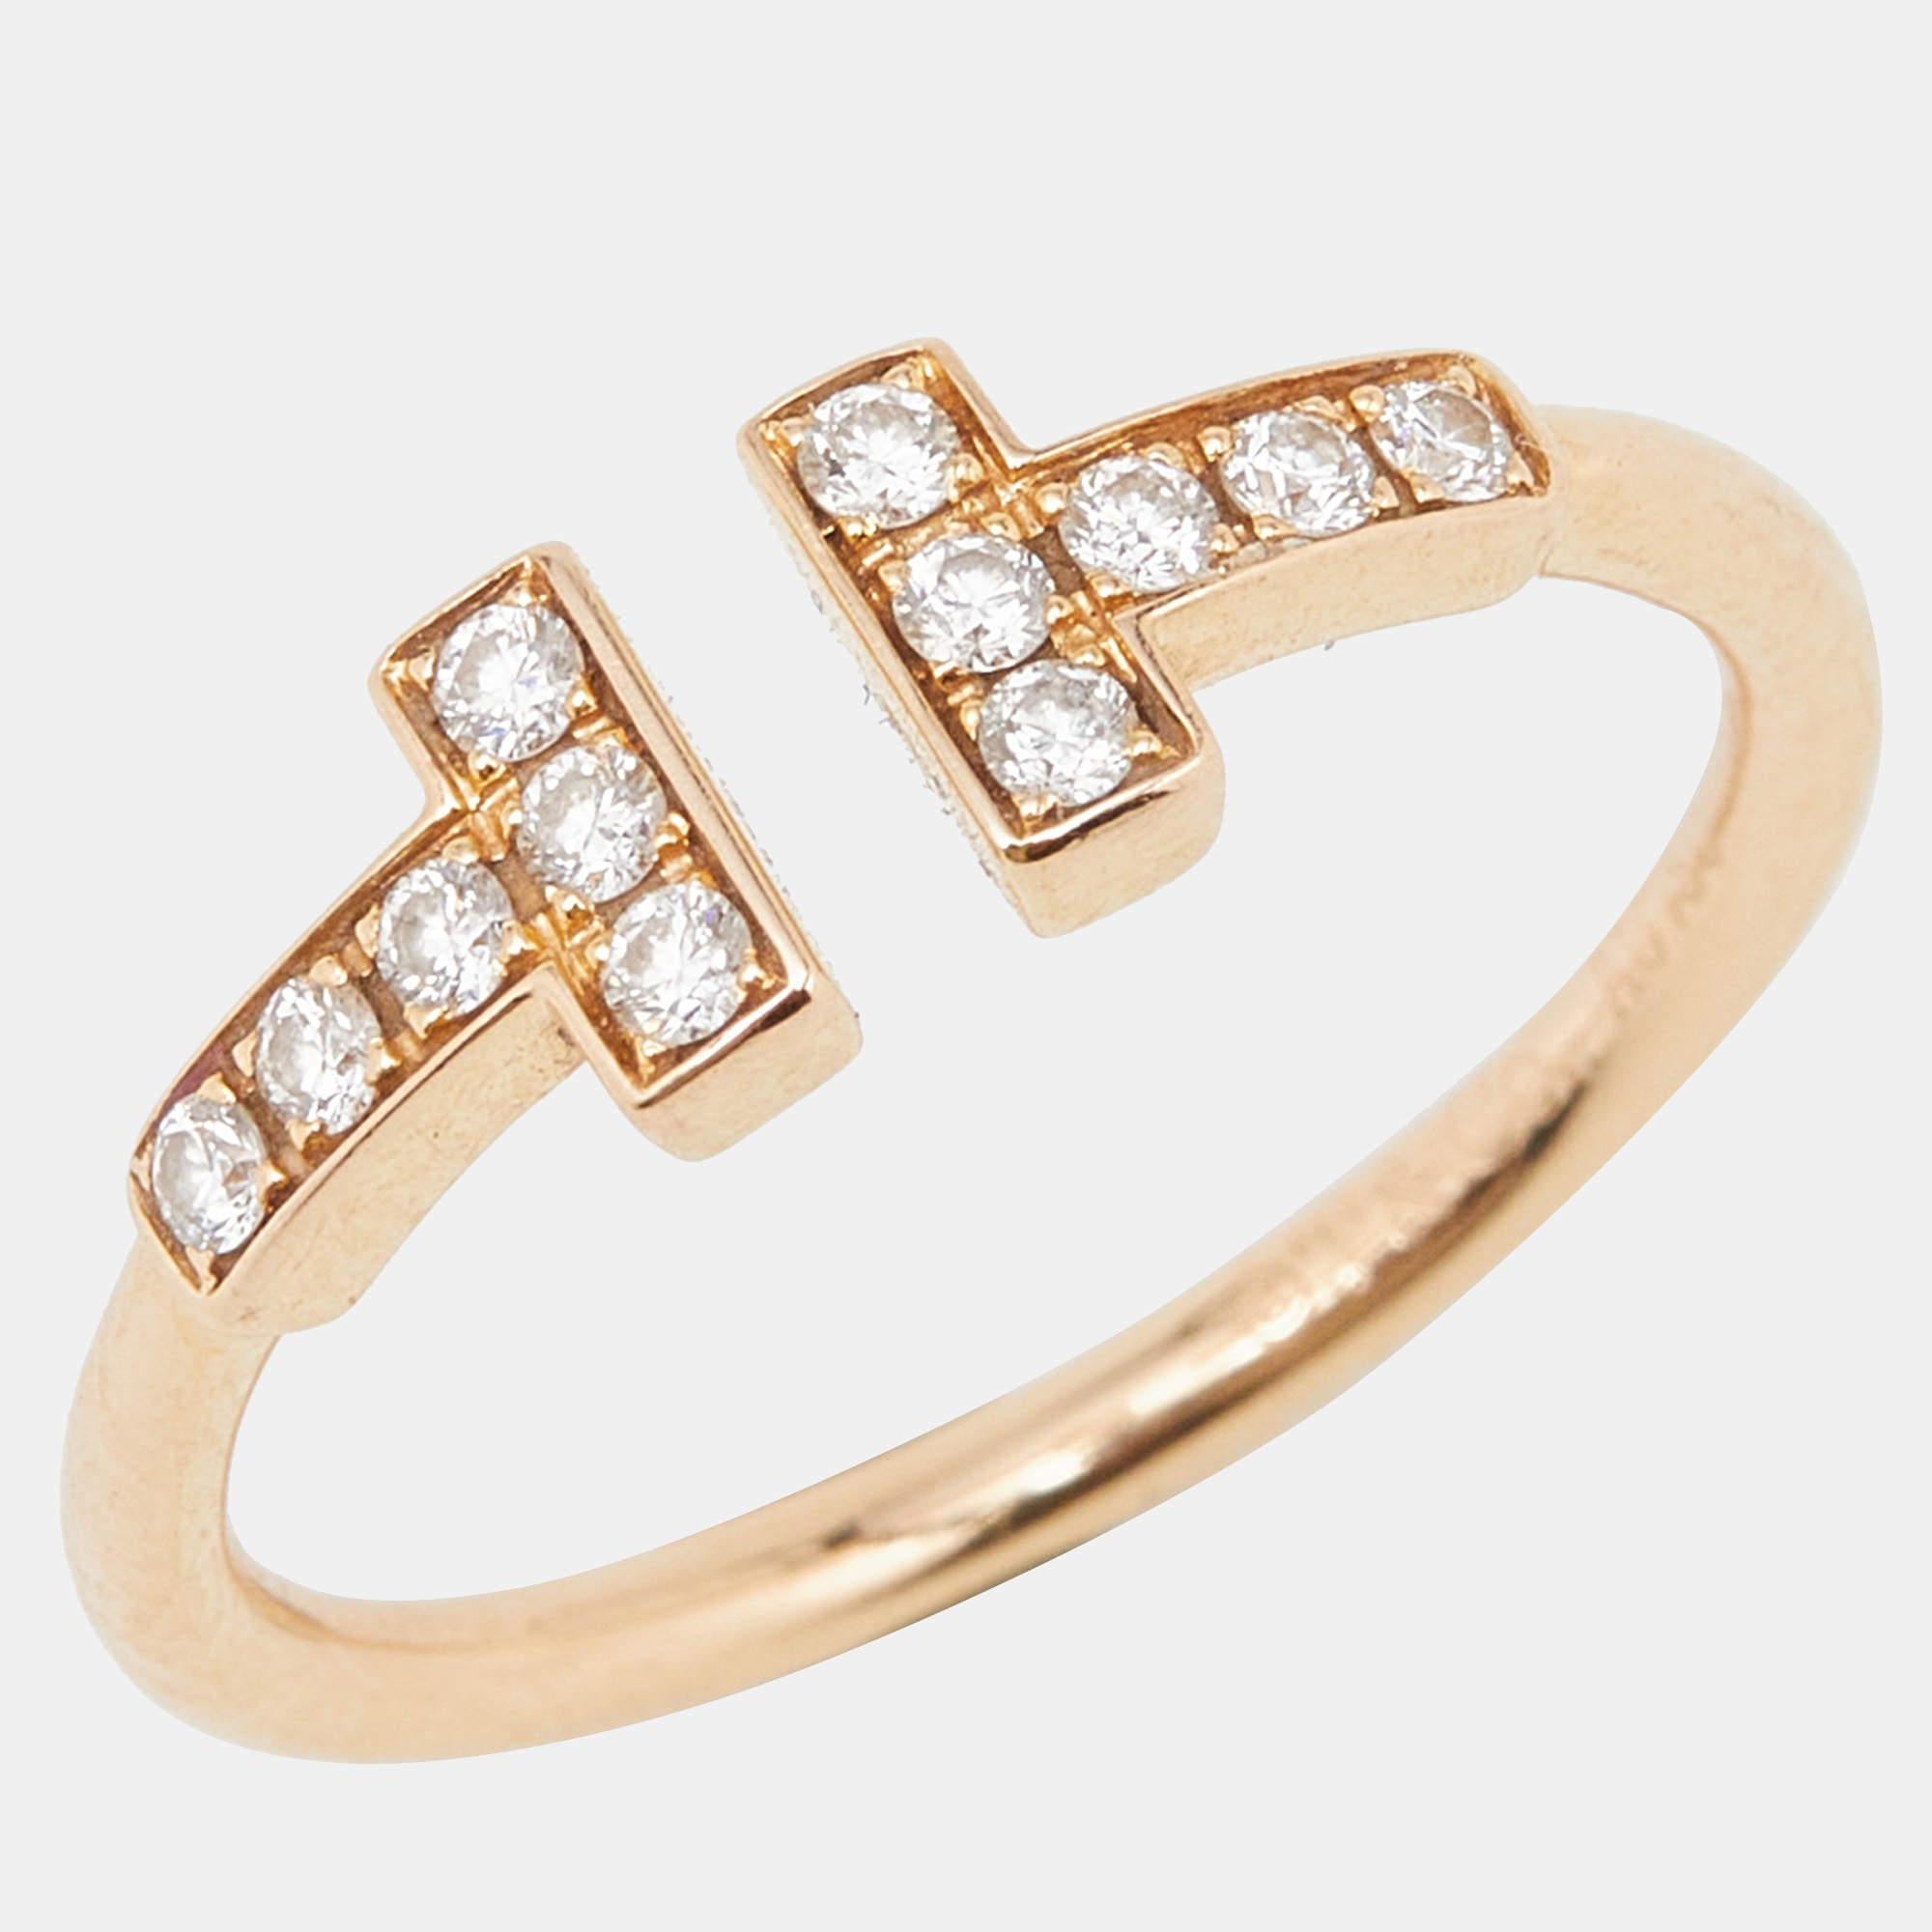 Elevate your style with the timeless elegance of the Tiffany & Co. Twire ring. Crafted with exquisite attention to detail, this stunning piece features a delicate intertwining design adorned with shimmering diamonds, showcasing luxury and